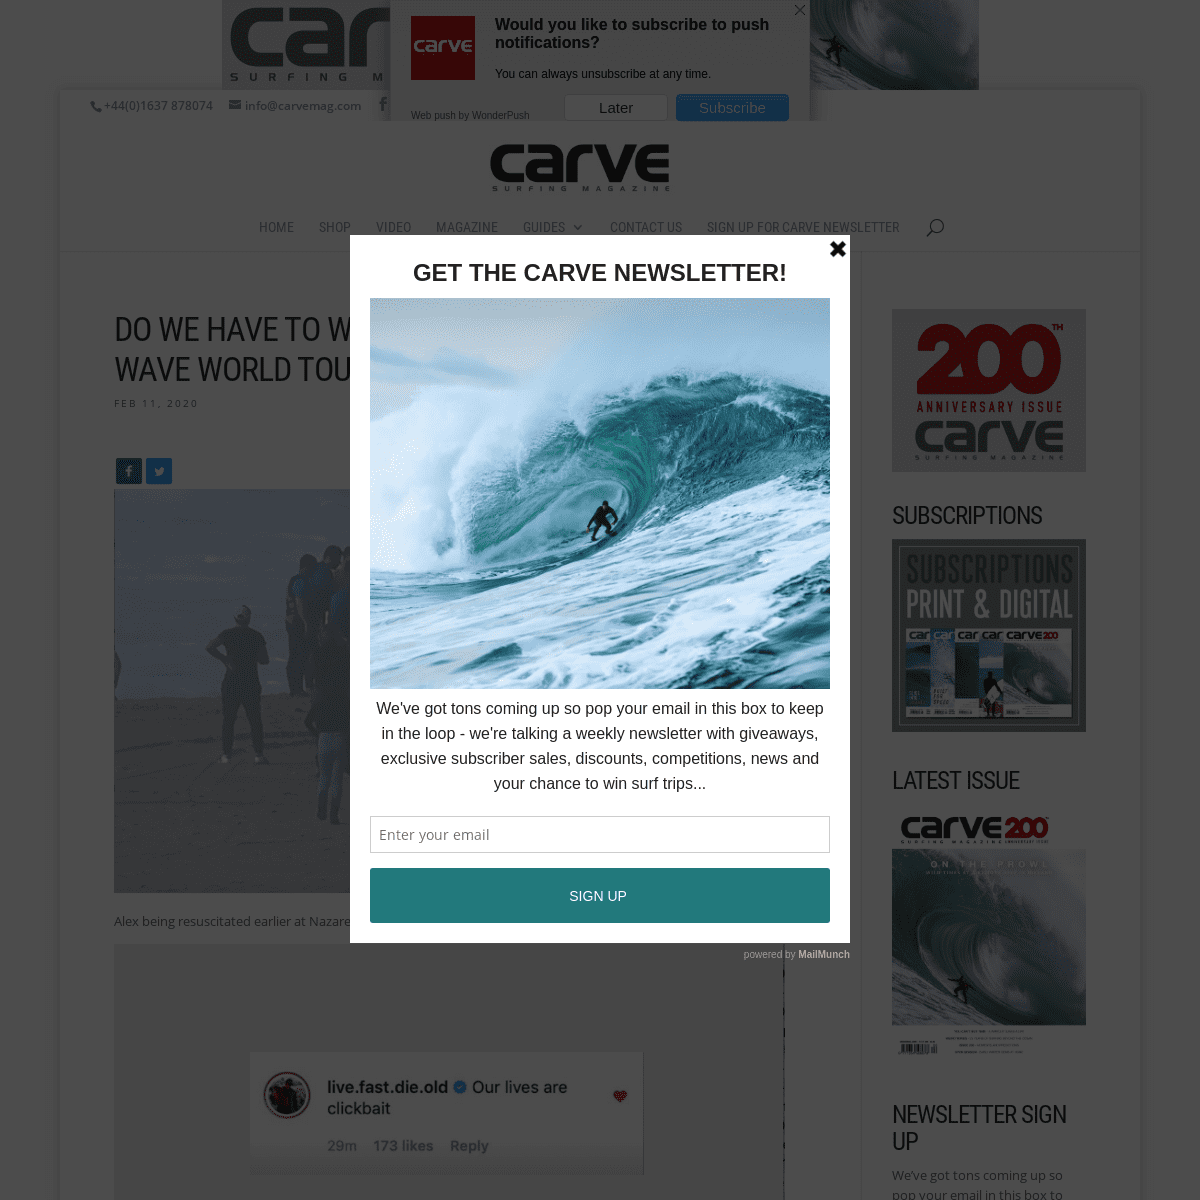 A complete backup of www.carvemag.com/2020/02/do-we-have-to-watch-someone-die-on-wsl-big-wave-world-tour/